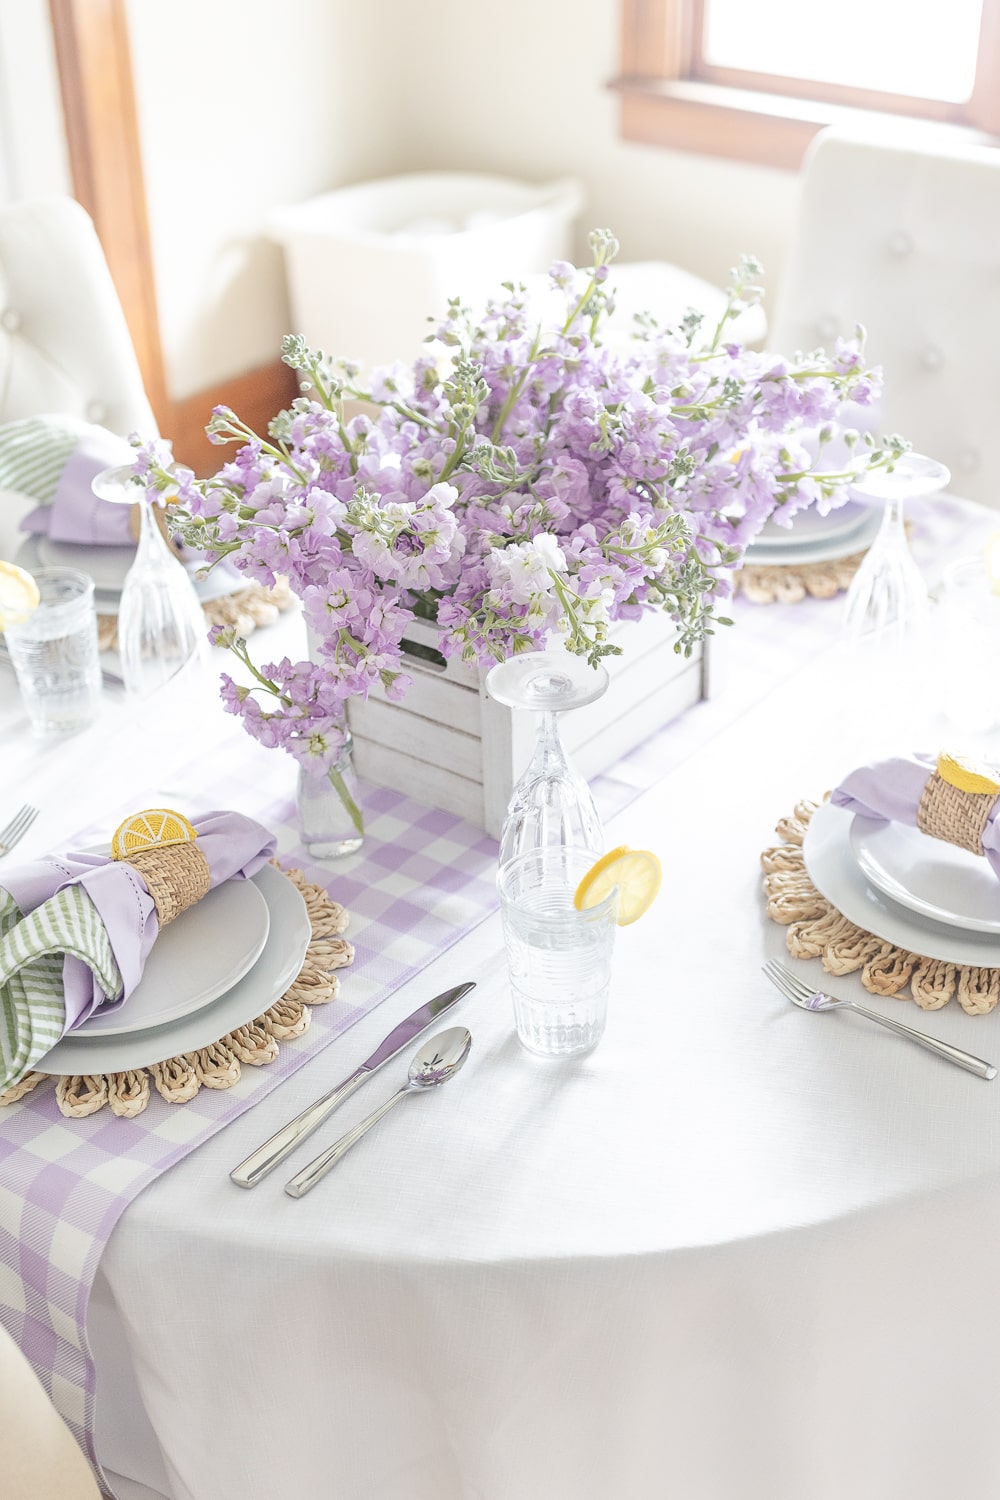 Rustic lavender centerpiece created with lavender stock by blogger Stephanie Ziajka on Diary of a Debutante